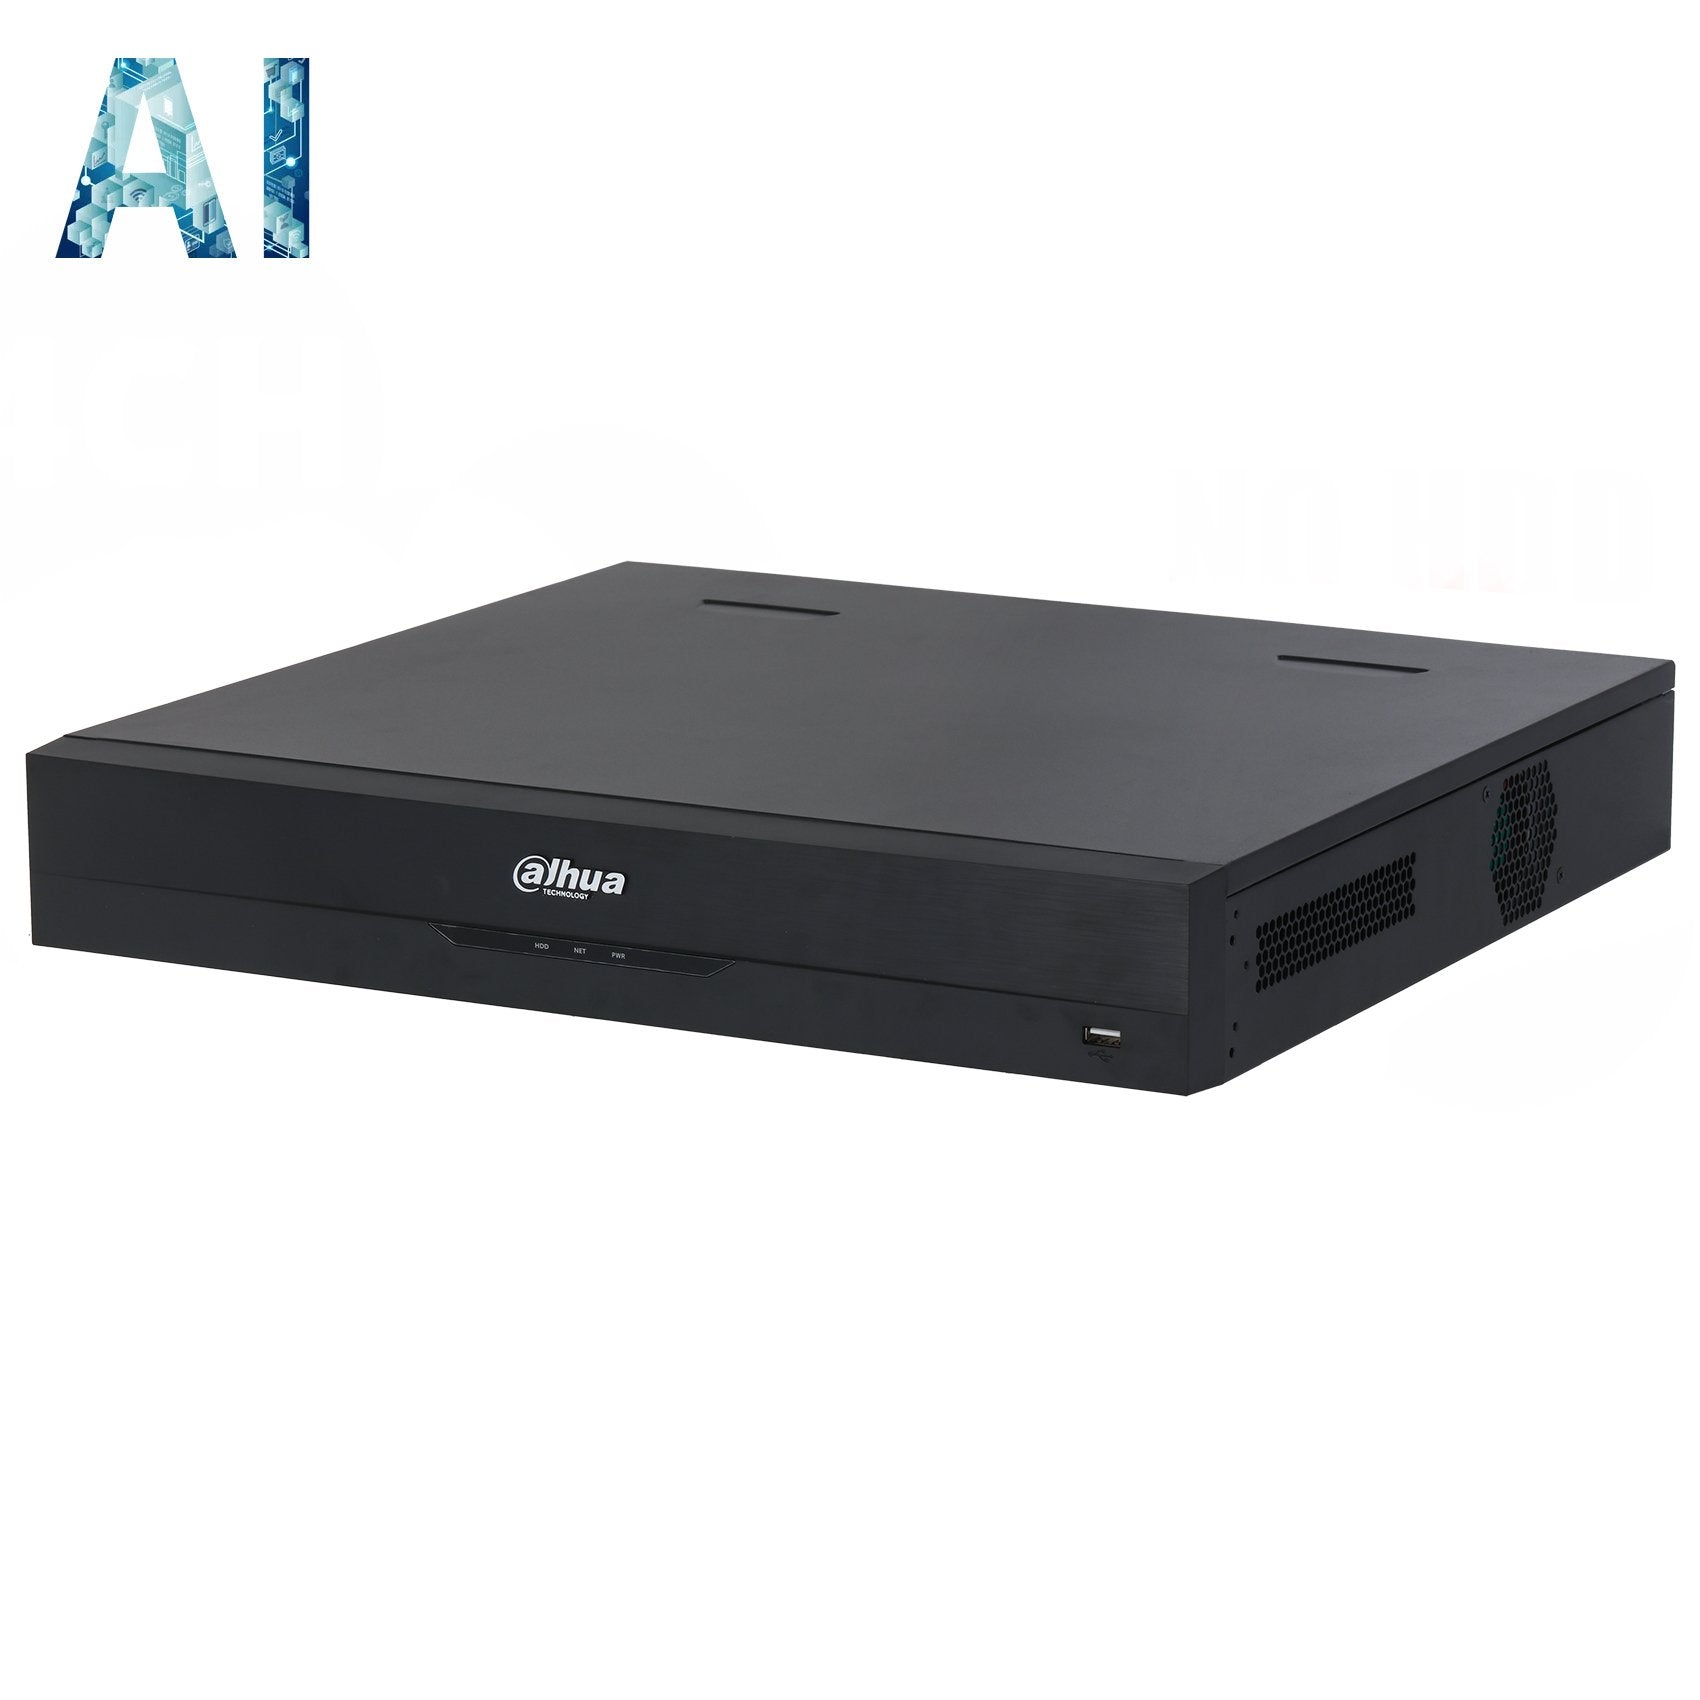 Dahua 32 Channel NVR, WizSense AI Series, 1.5RU, 384MB (200MB With AI Function Enabled), 2 x Gigabit NIC, 4 x HDD **NO POE PORTS OR HDD INSTALLED**